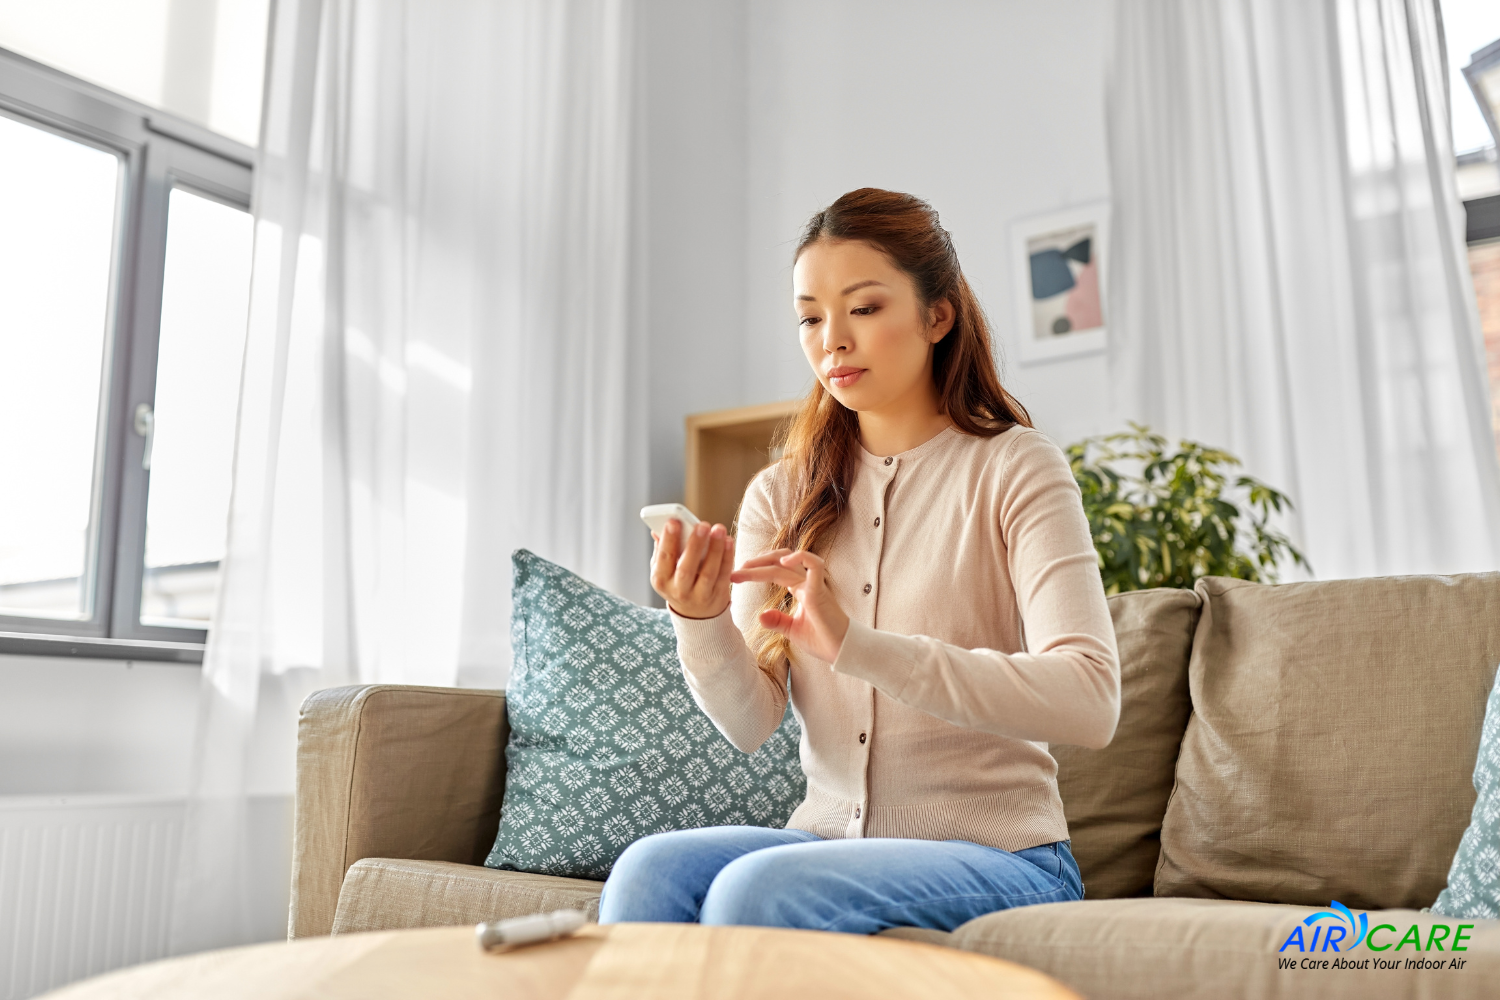 Home allergen testing provides valuable insights into the allergens present in your living space, allowing you to take targeted actions to reduce exposure and improve indoor air quality.